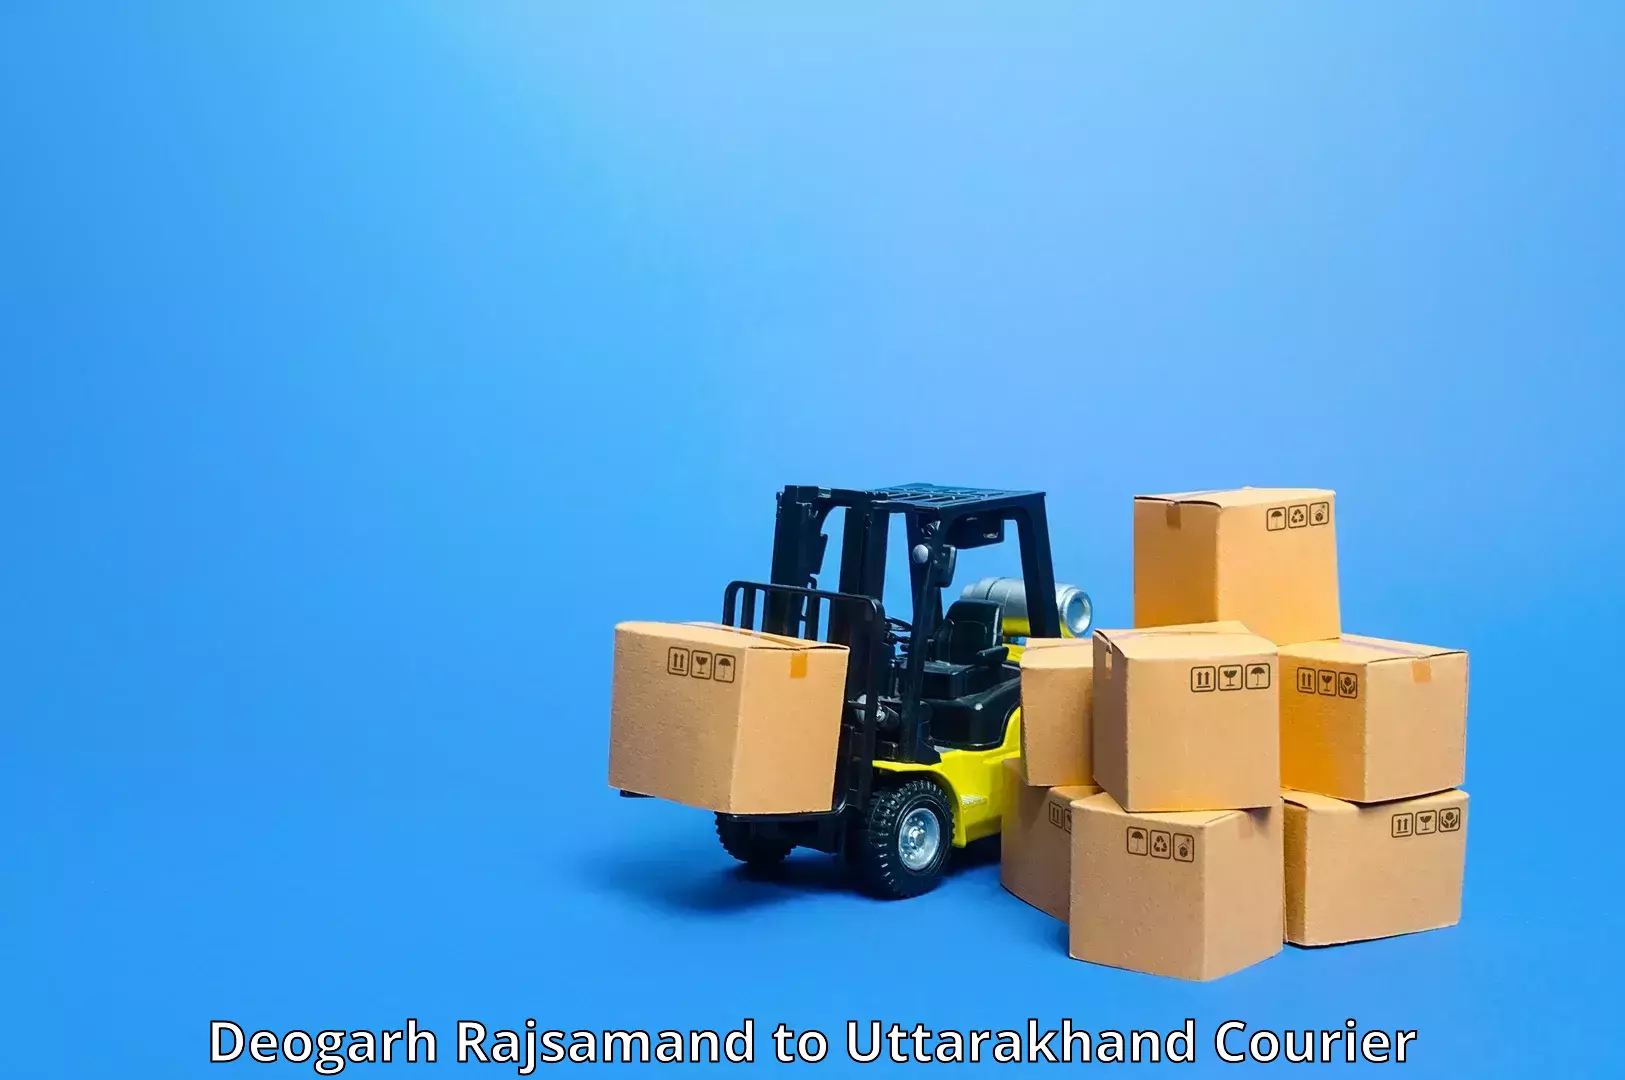 Large package courier Deogarh Rajsamand to Uttarakhand